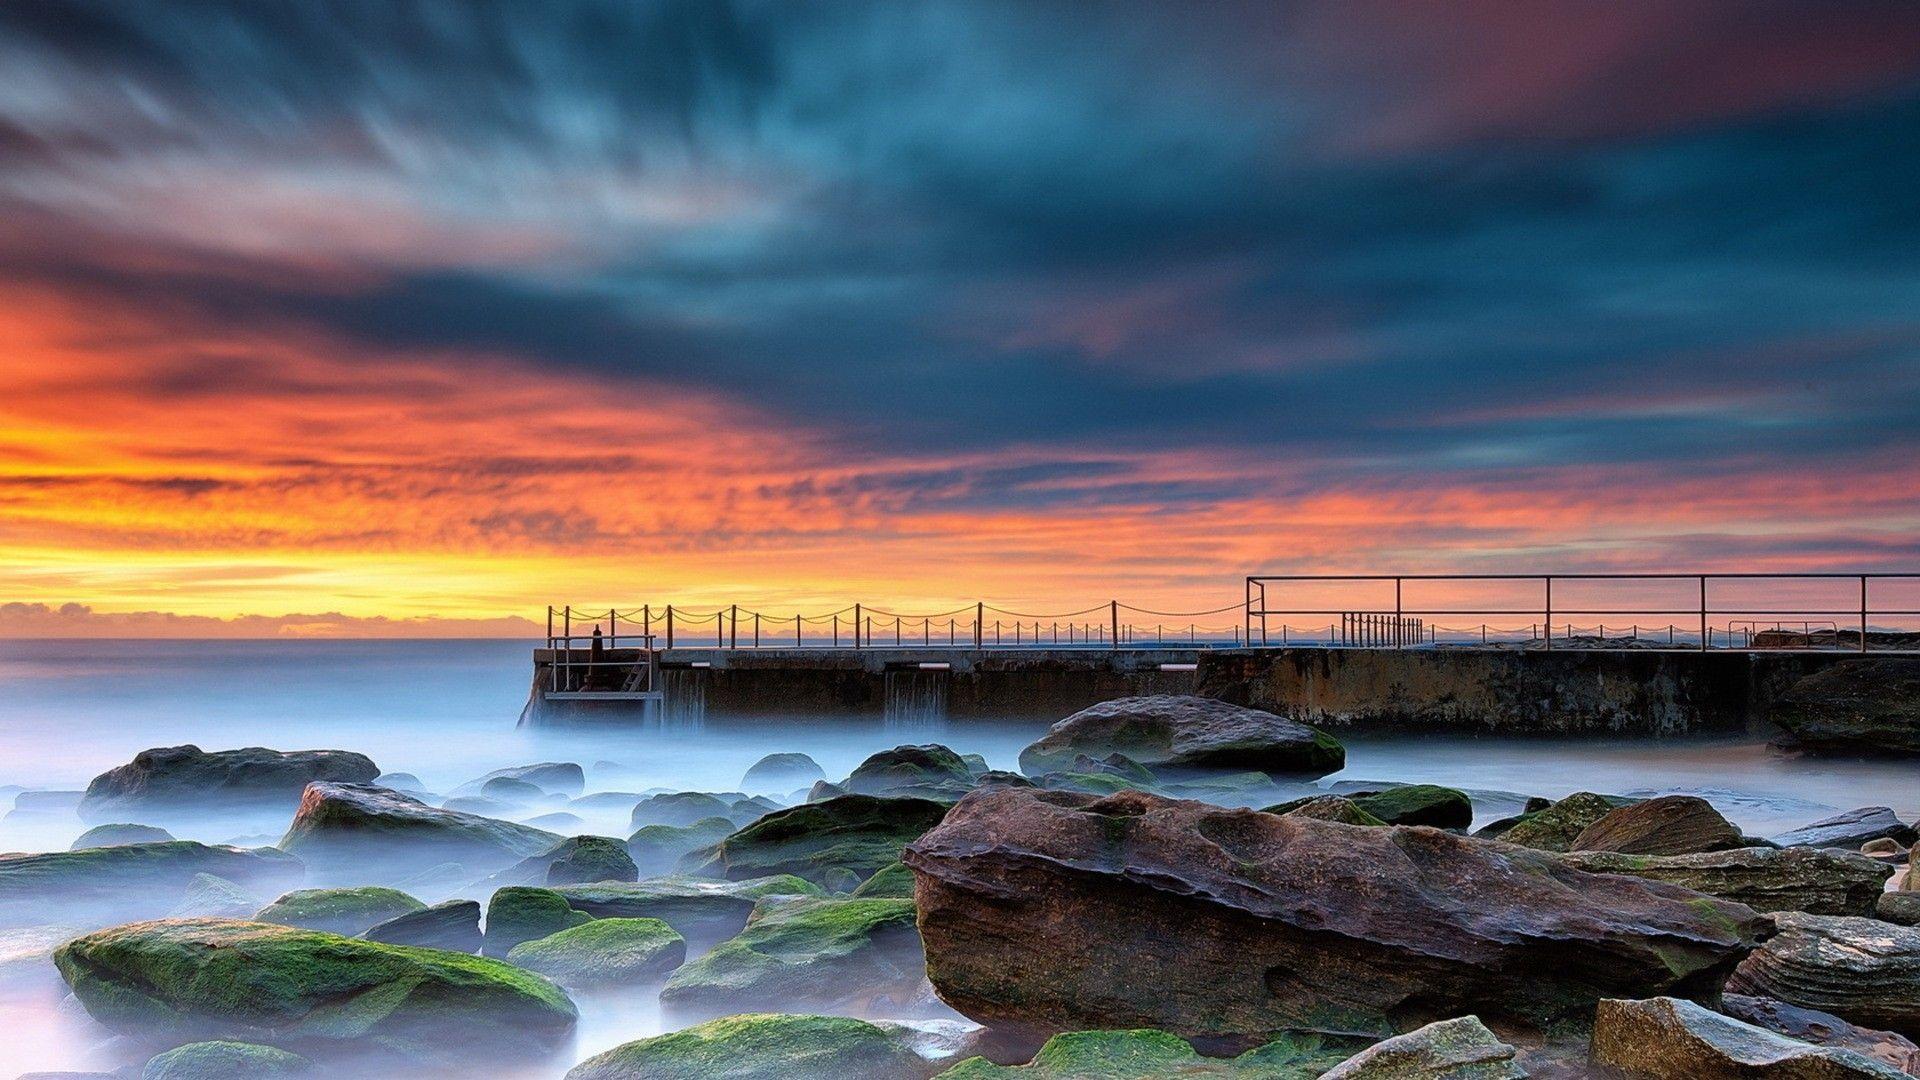 Wharf on a rocky shore at sunset 1920x rocky, shore, sunset